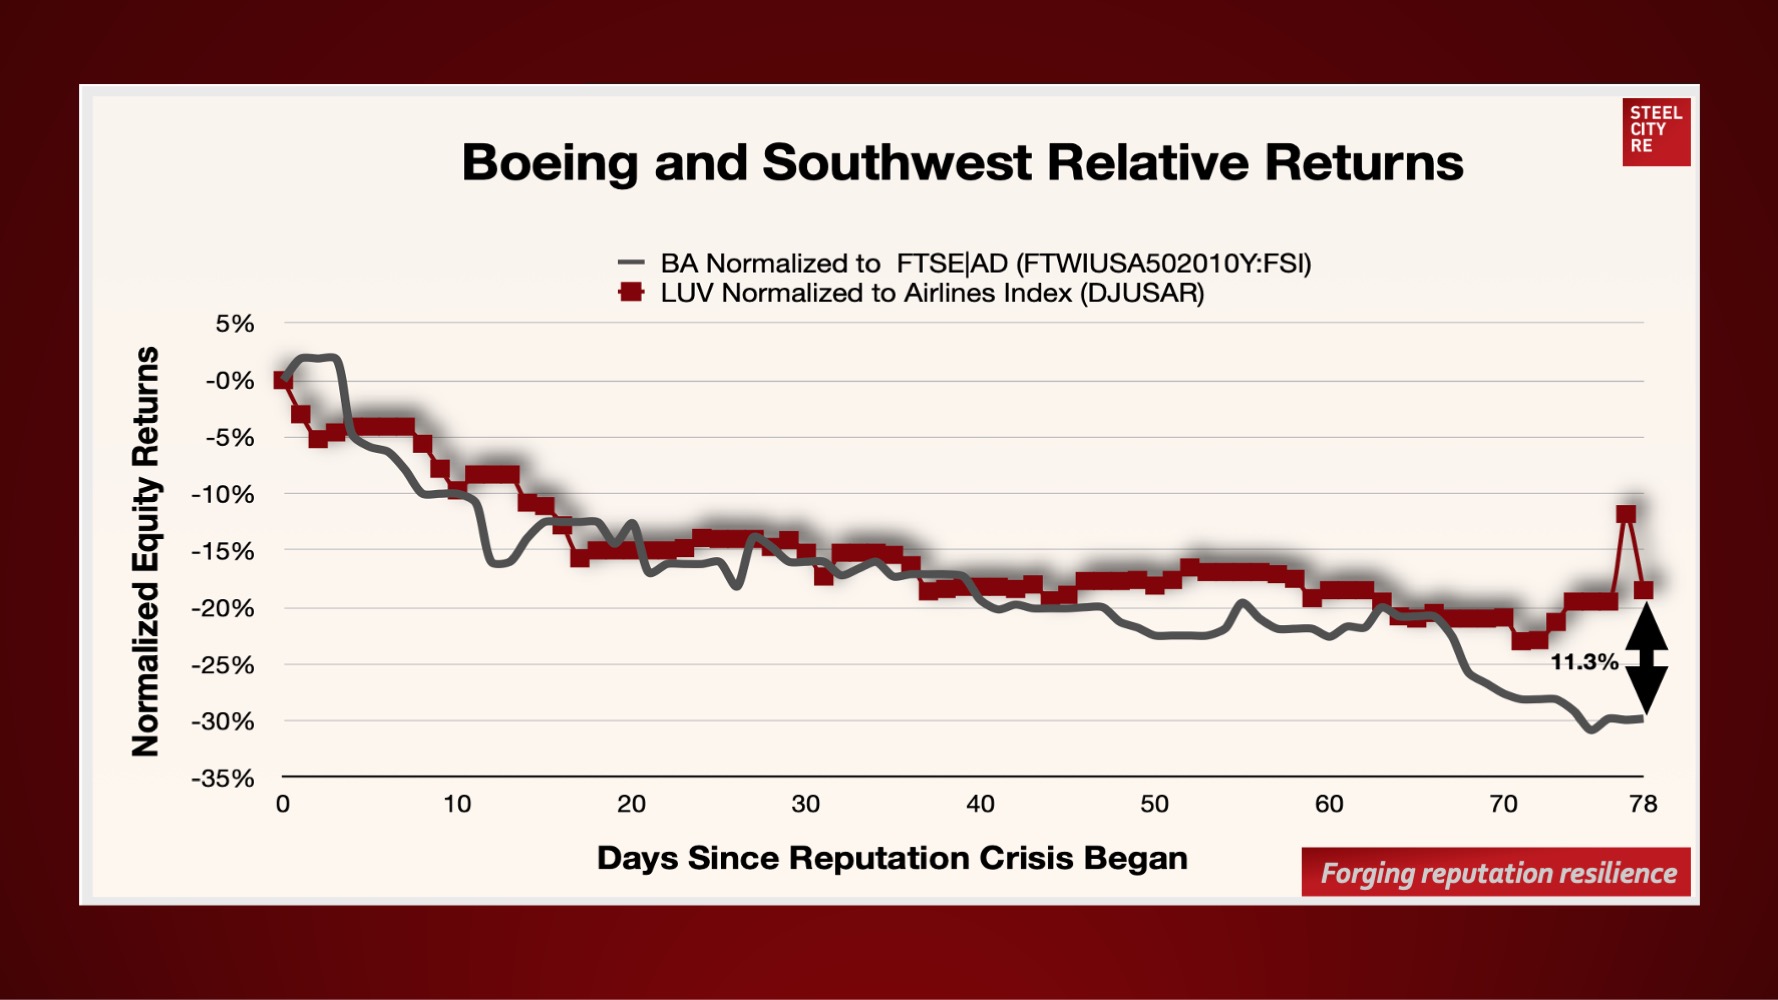 Boeing Company reputation crisis day 78. Equity is down 29.8% to peers: 11.3% worse than Southwest Airline's 18.5% day 78 under performance.